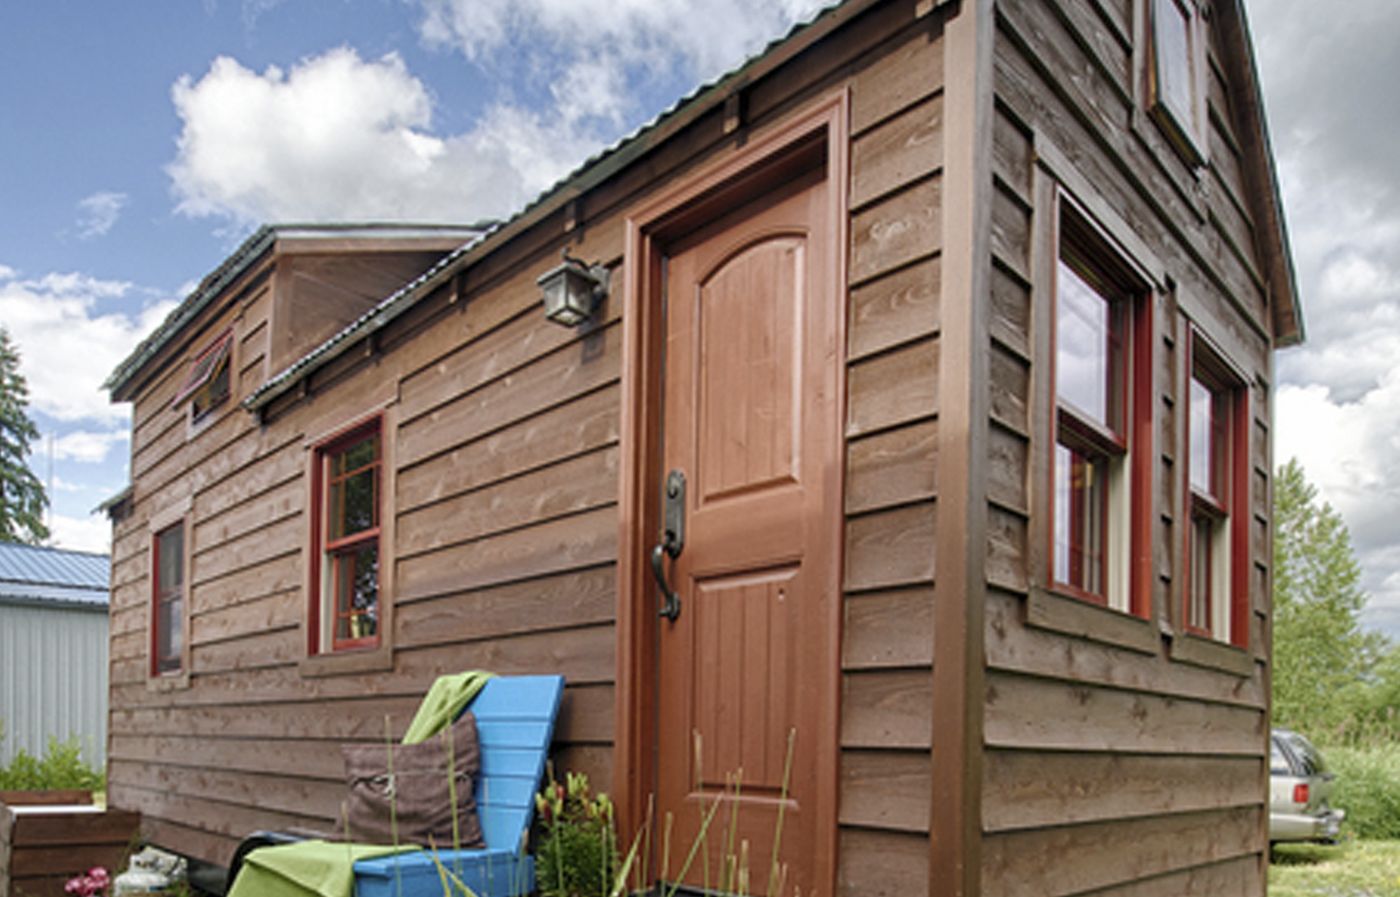 8 Tiny Houses that Have More Storage Than Your House - This Old House